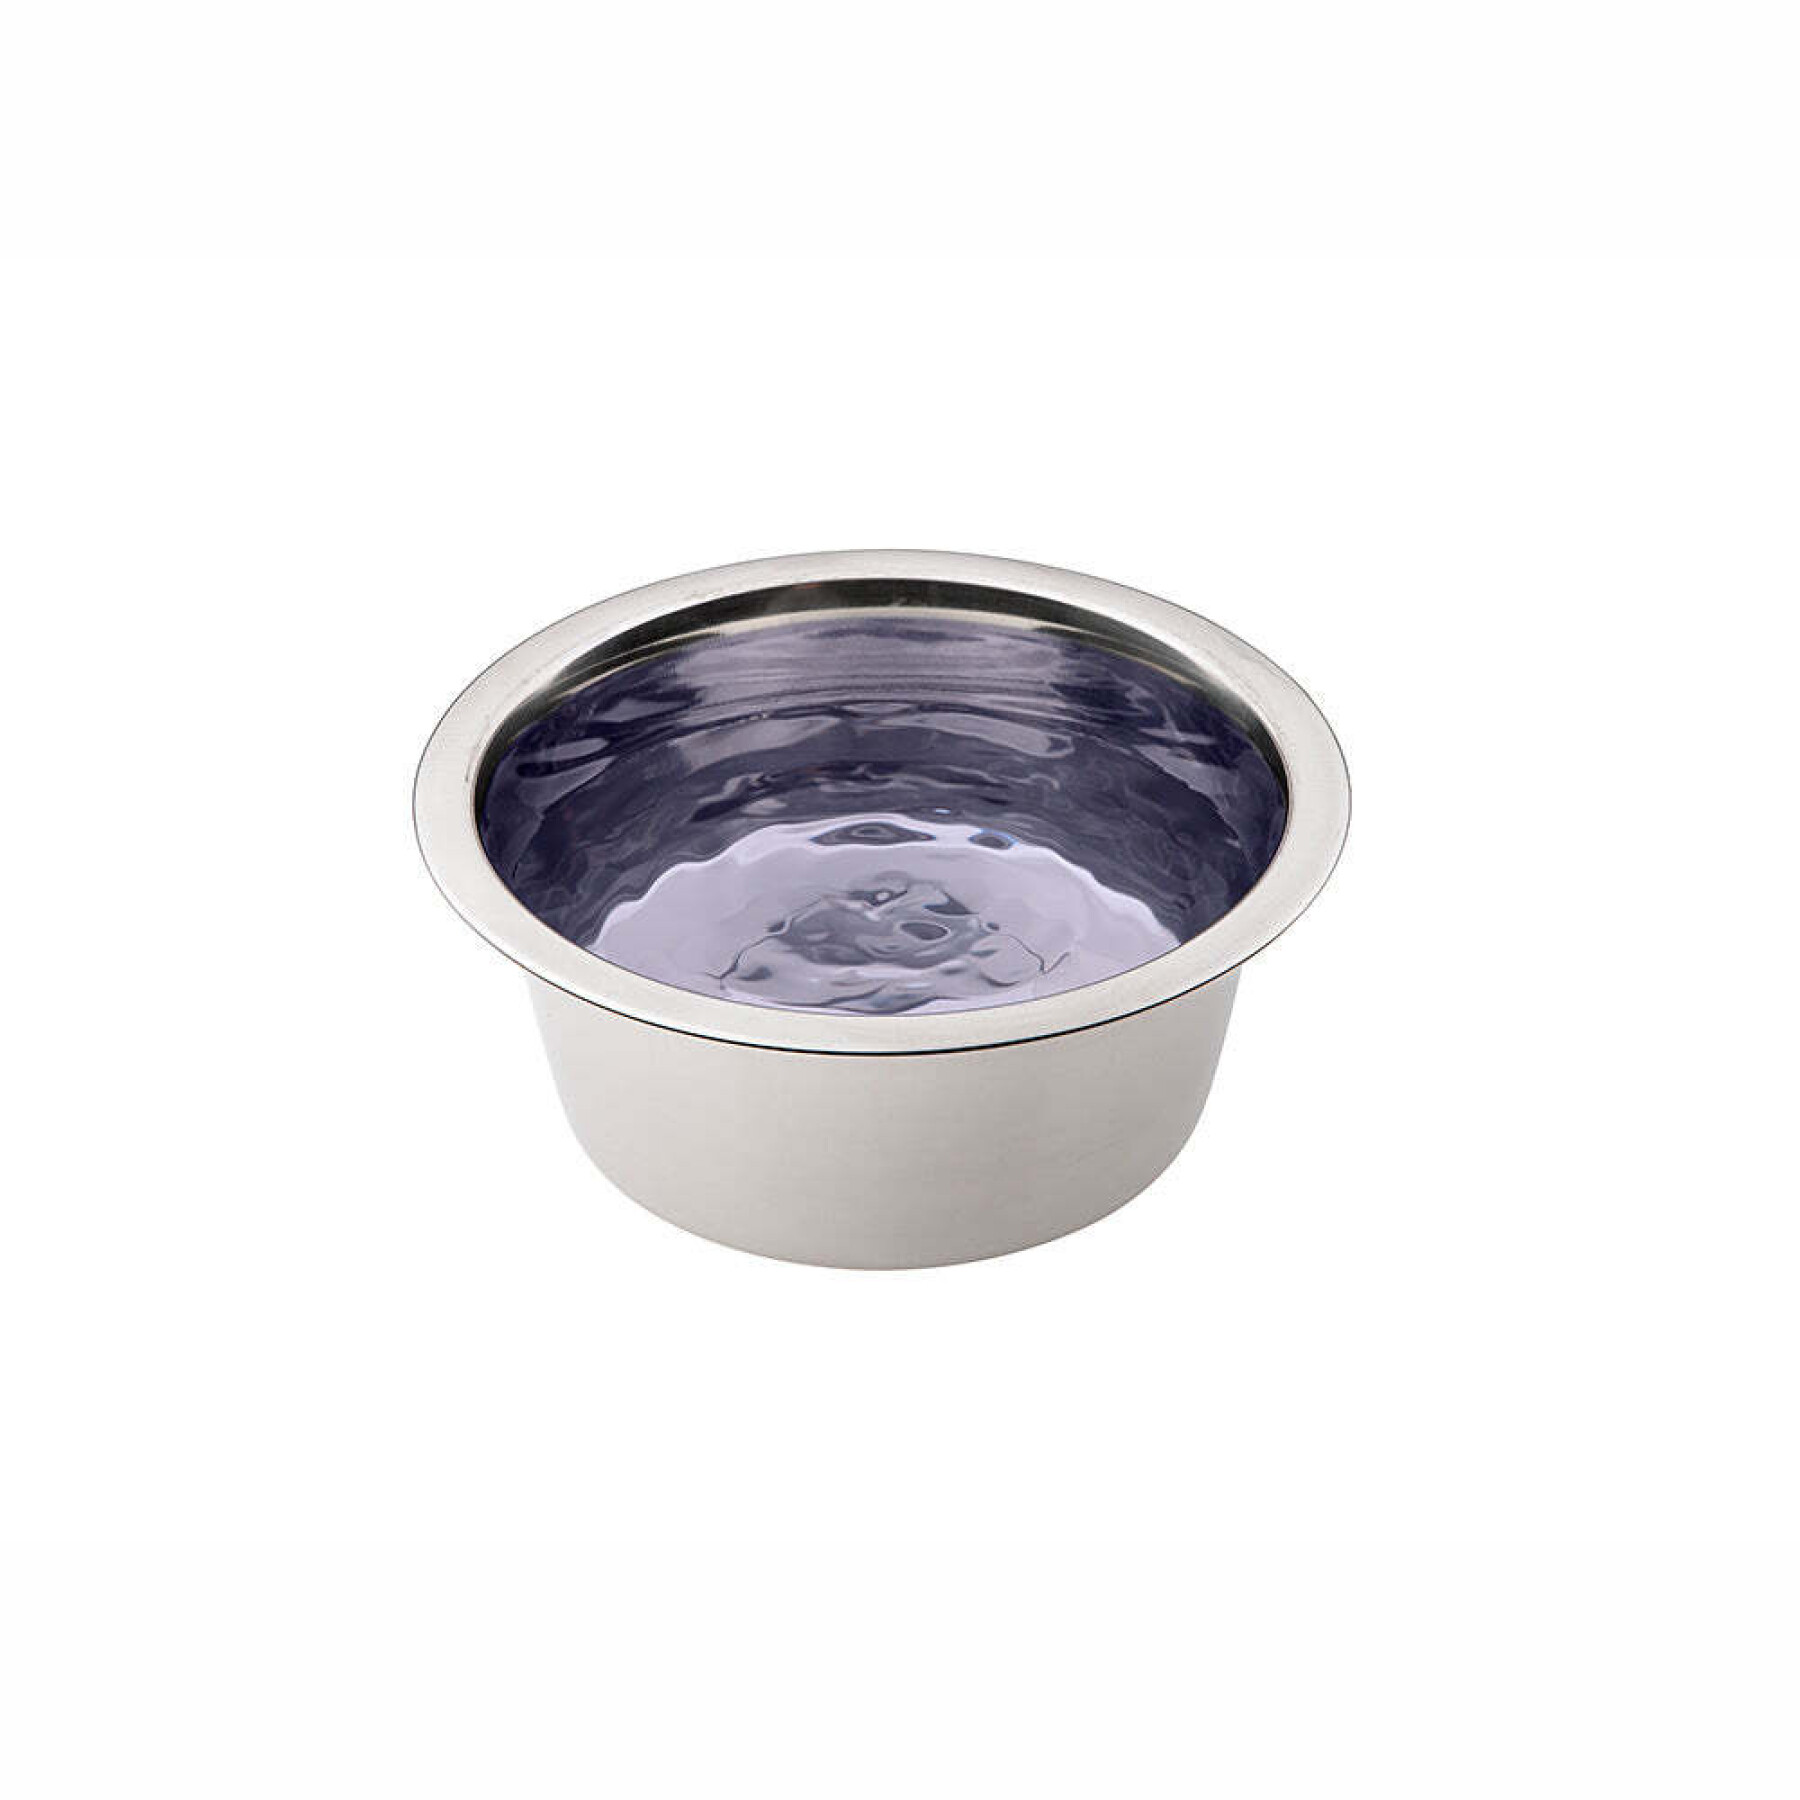 Dog and cat bowls Ferplast Orion 58